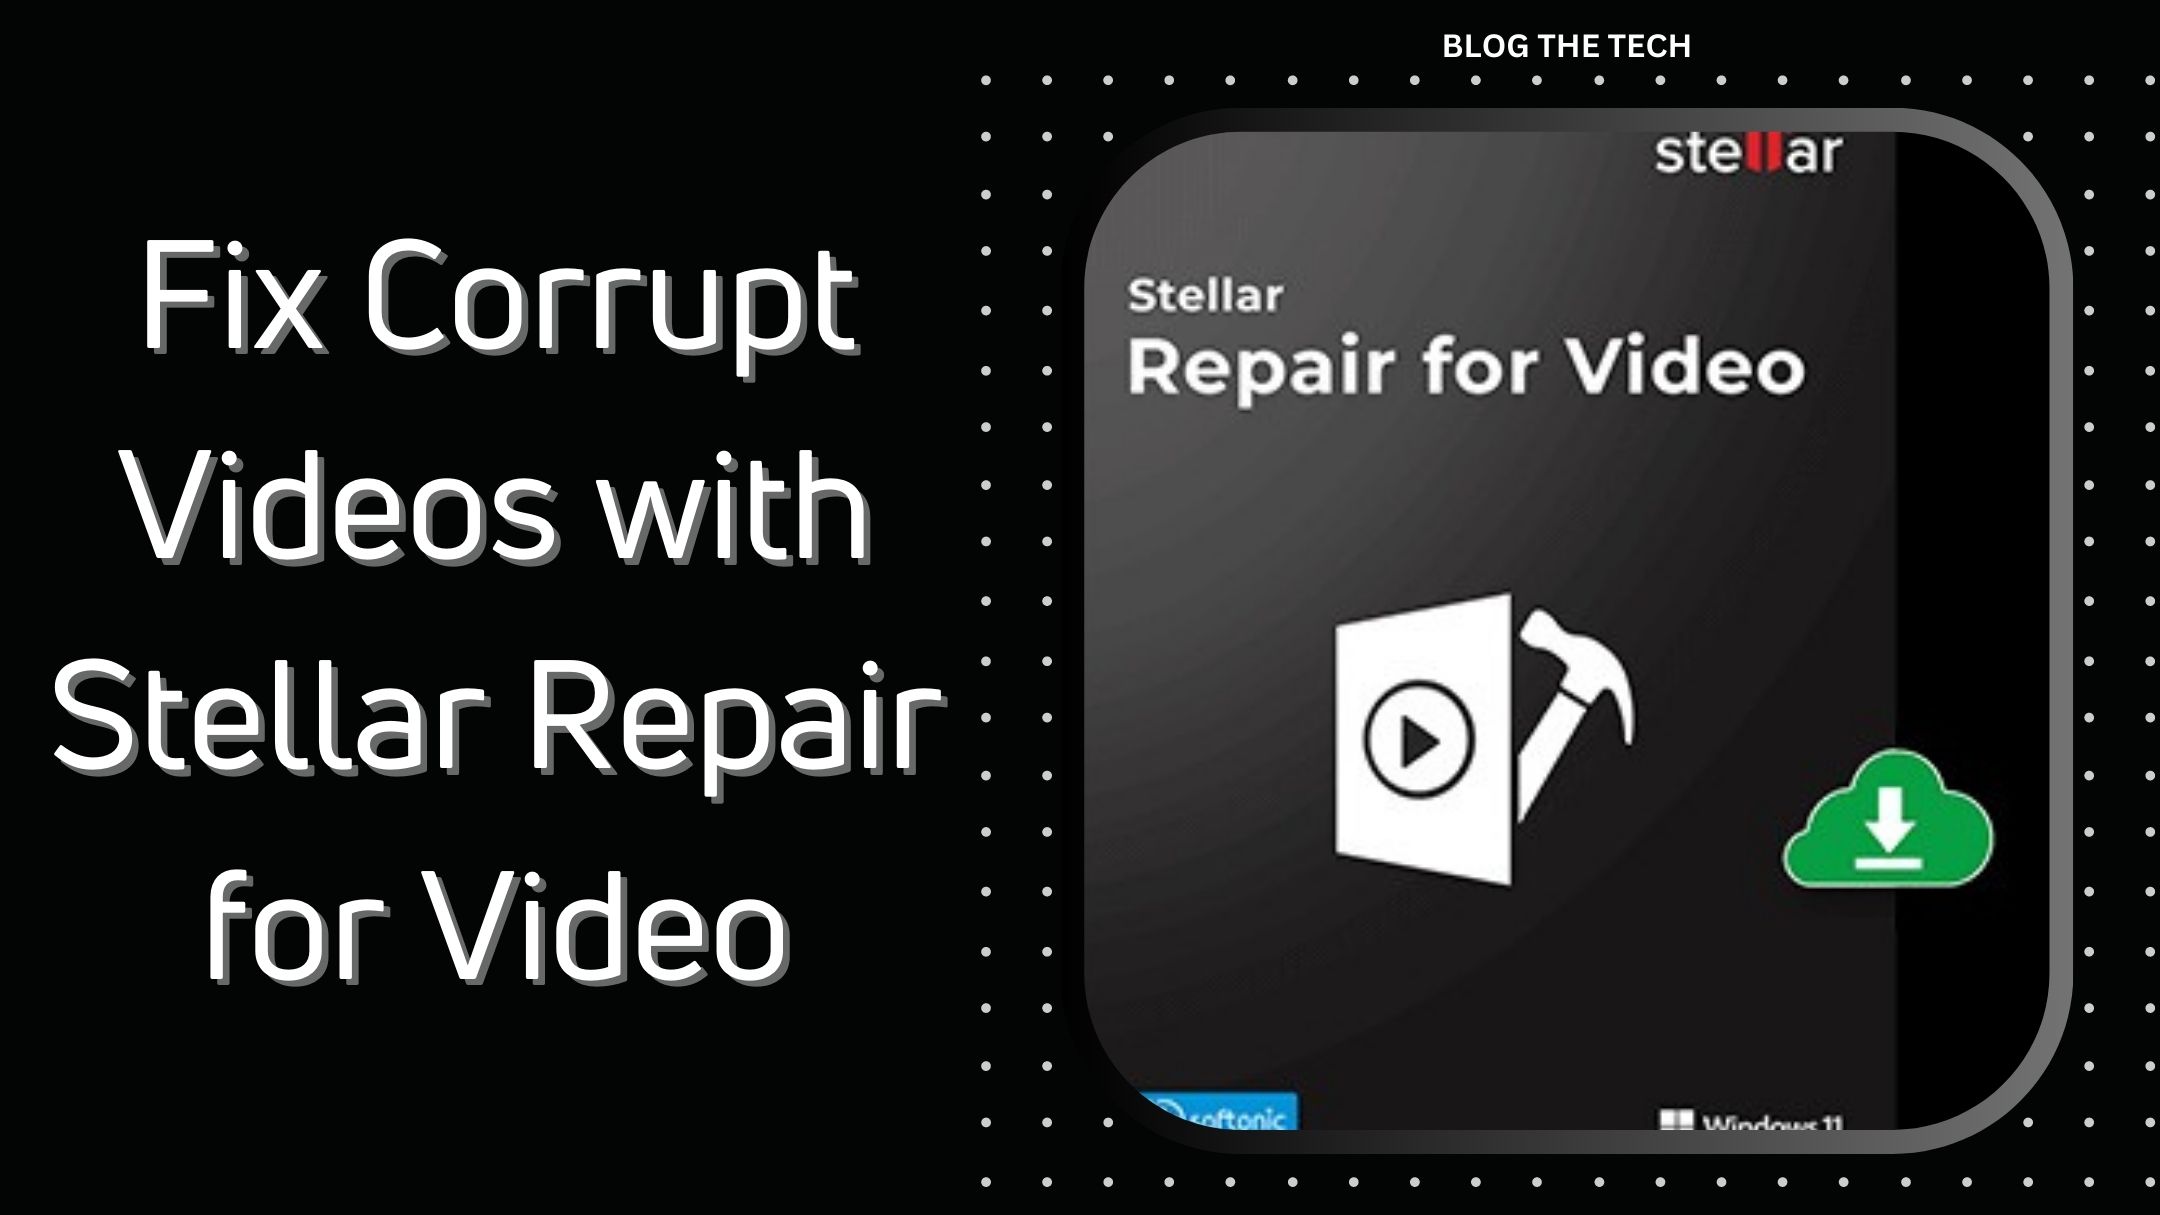 fix-corrupt-videos-with-stellar-repair-for-video-featured